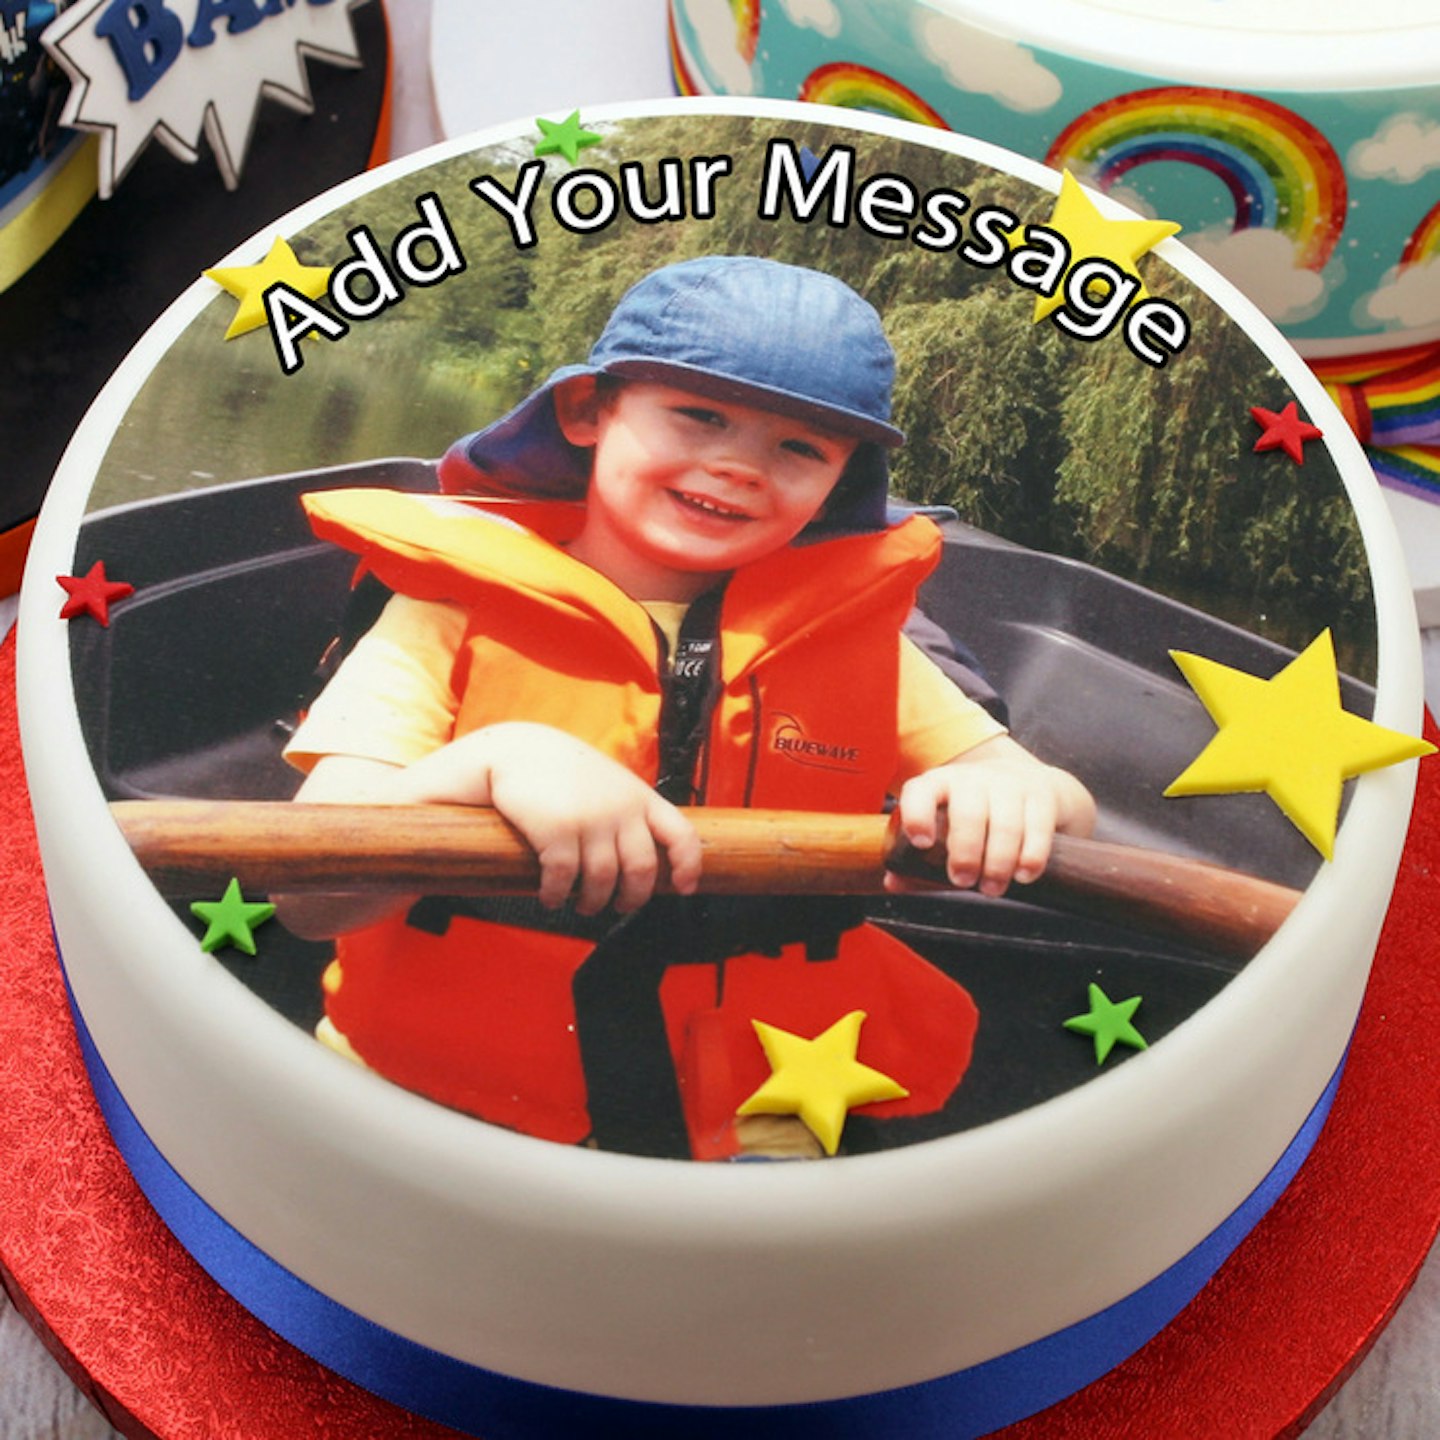 EDIBLE PHOTO PRINT FOR CAKES - PERSONALISED MESSAGE